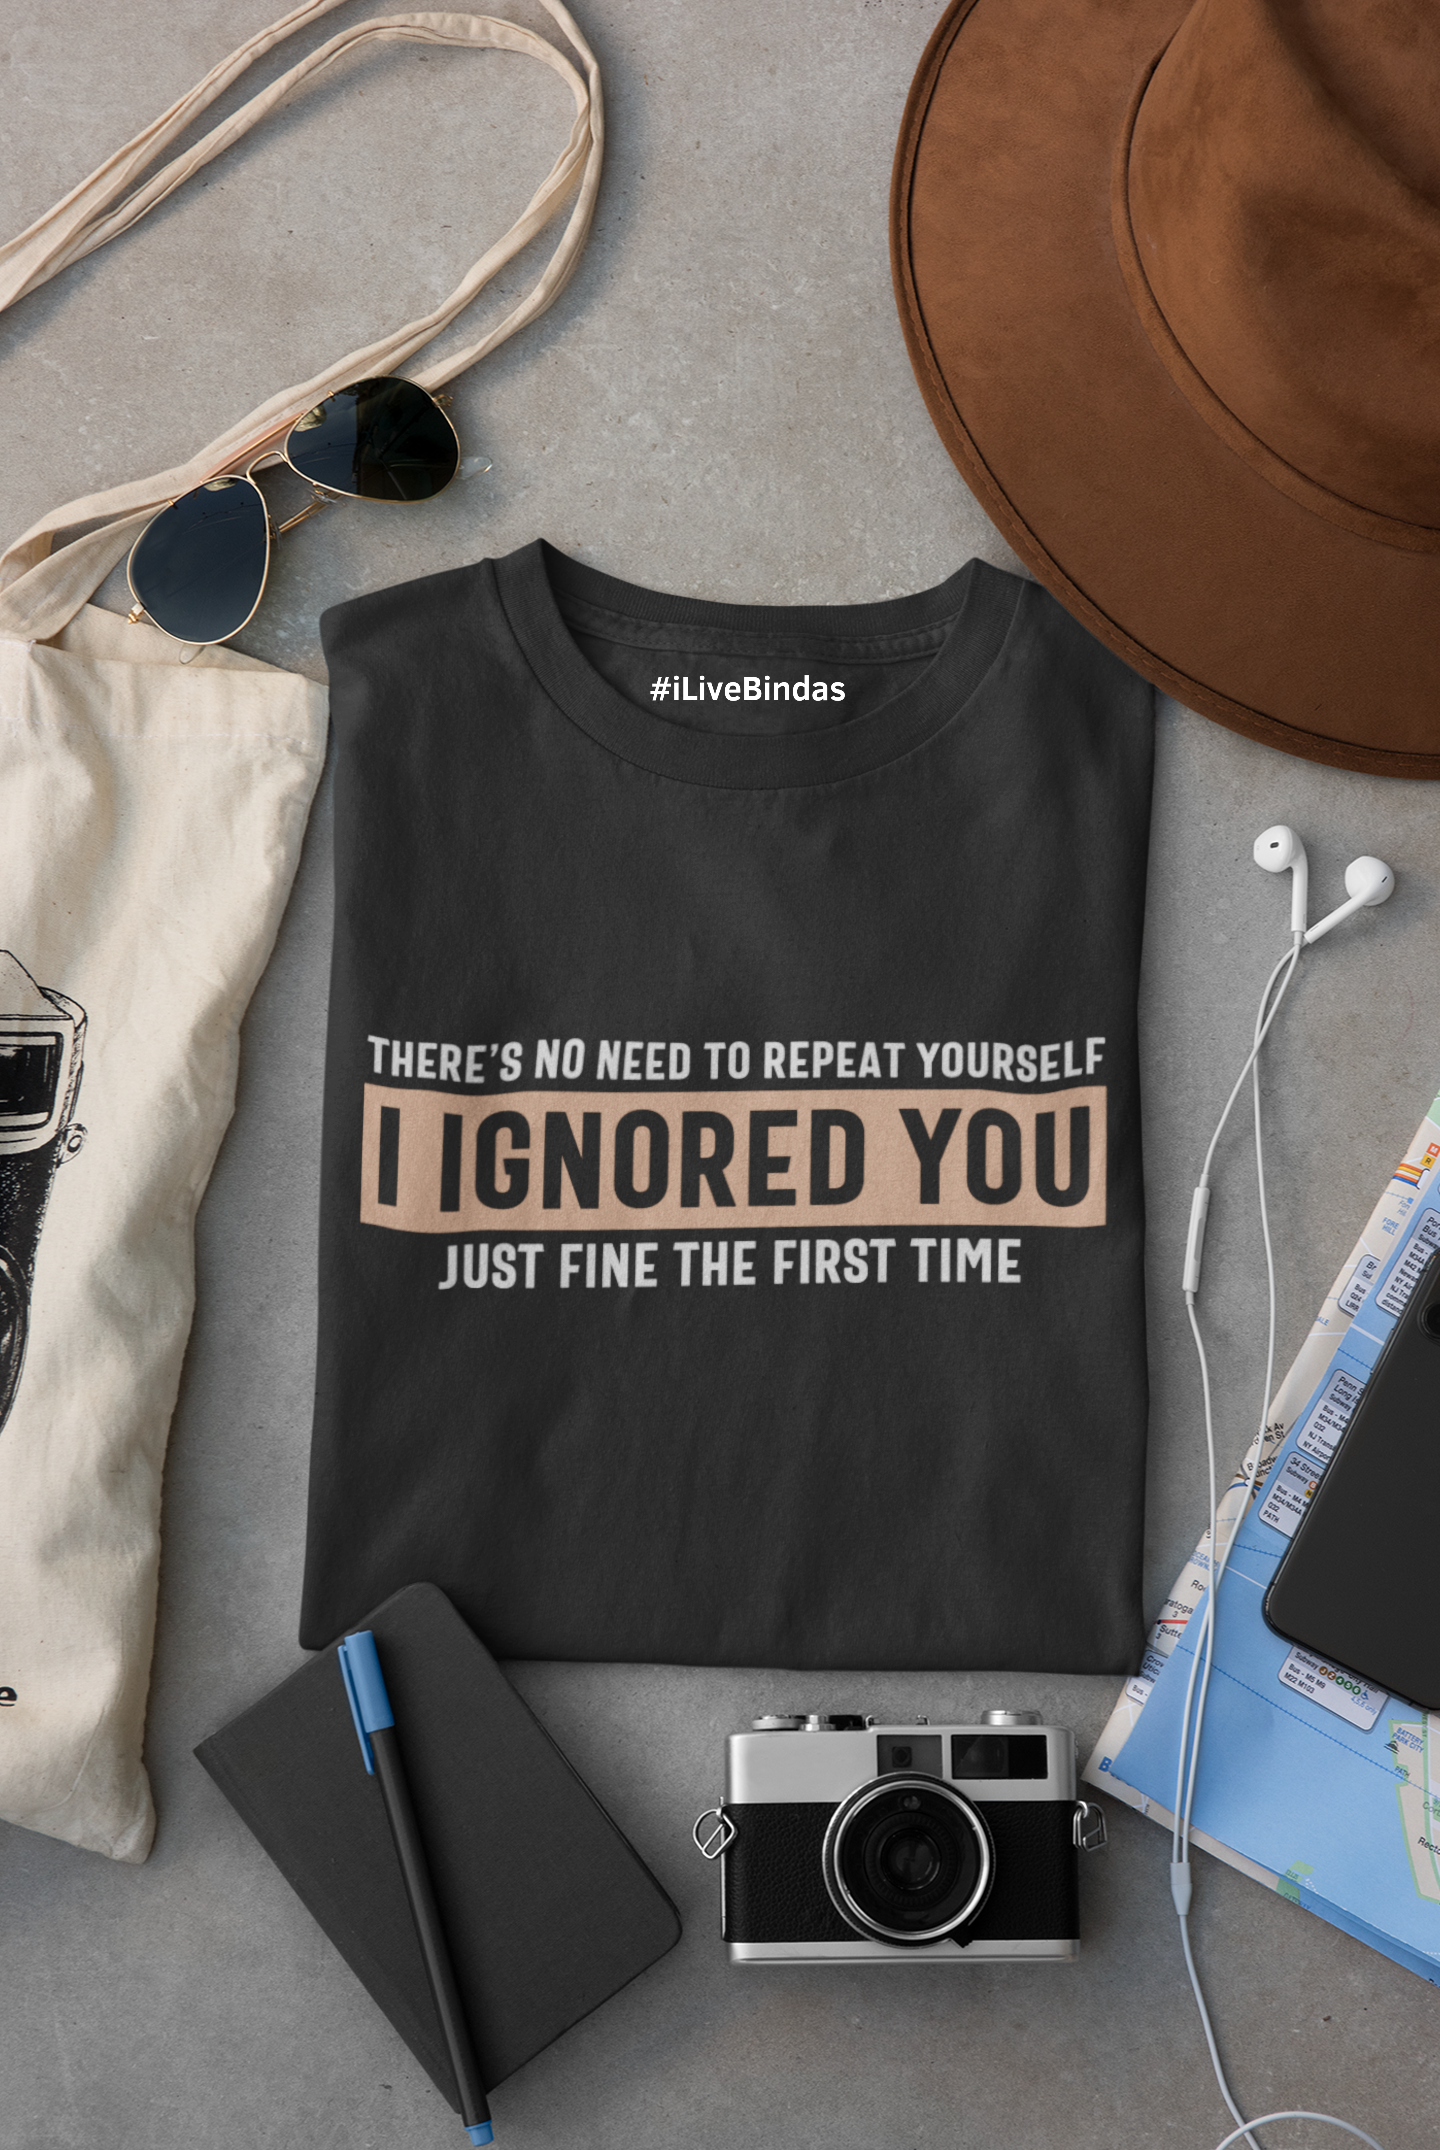 I IGNORED YOU 100% COTTON T-SHIRT (UNISEX FIT)